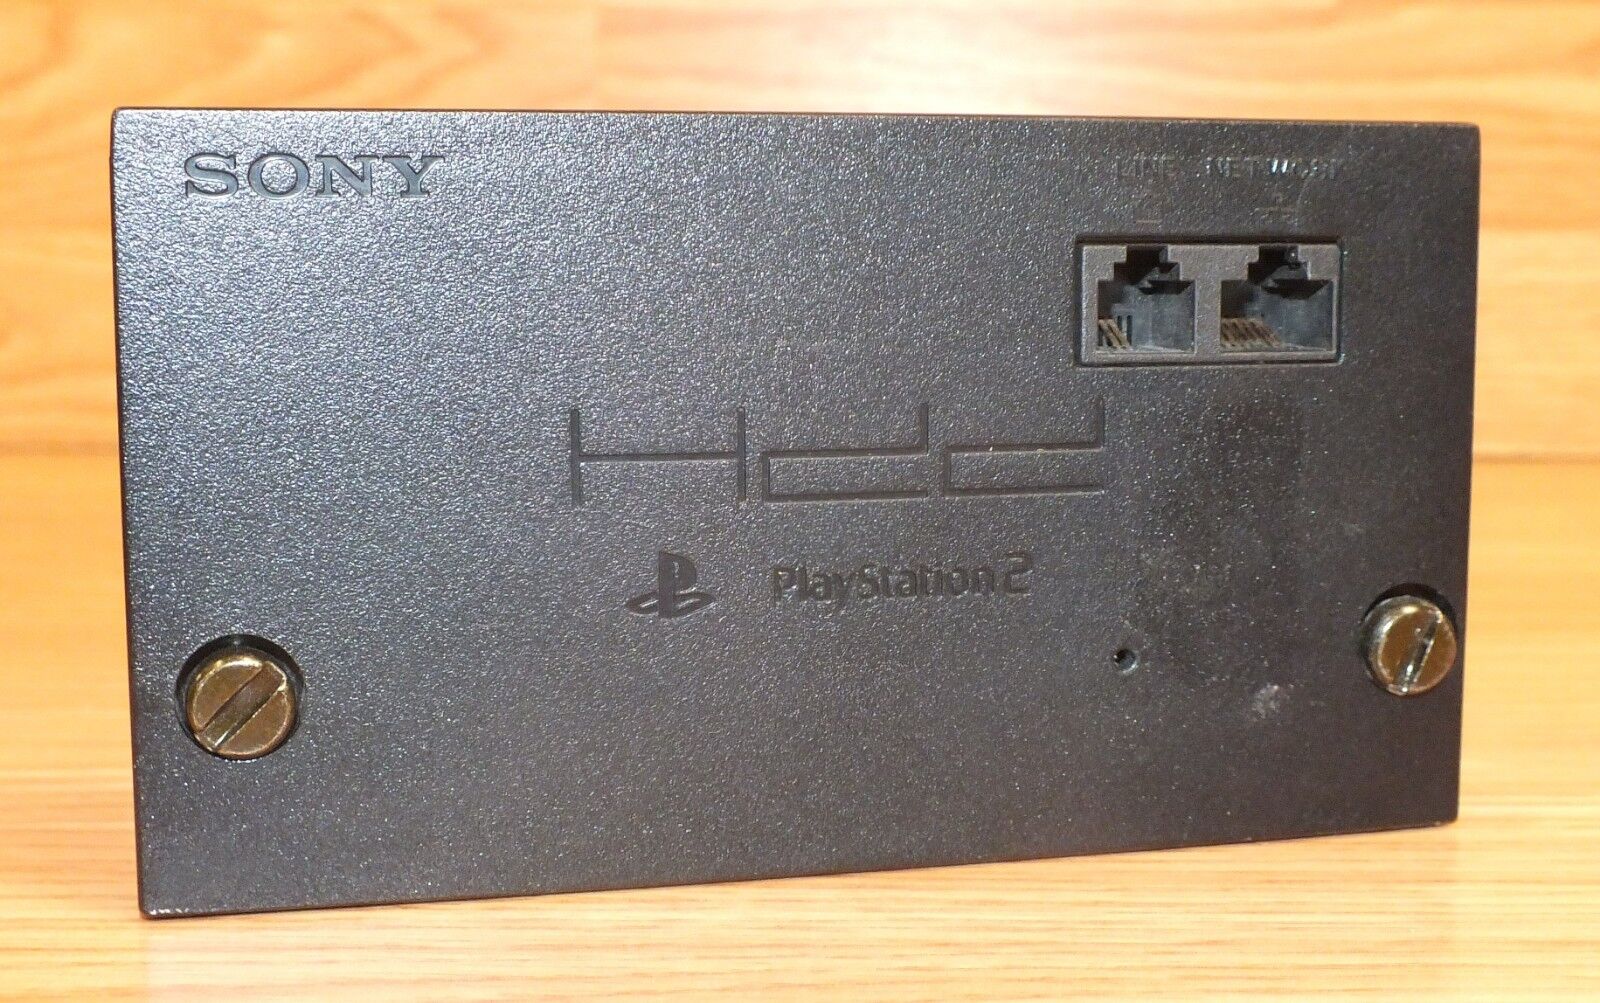 Sony Playstation PS2 SCPH-10281 56 Kbps Network / Modem Combo HDD Online Adapter